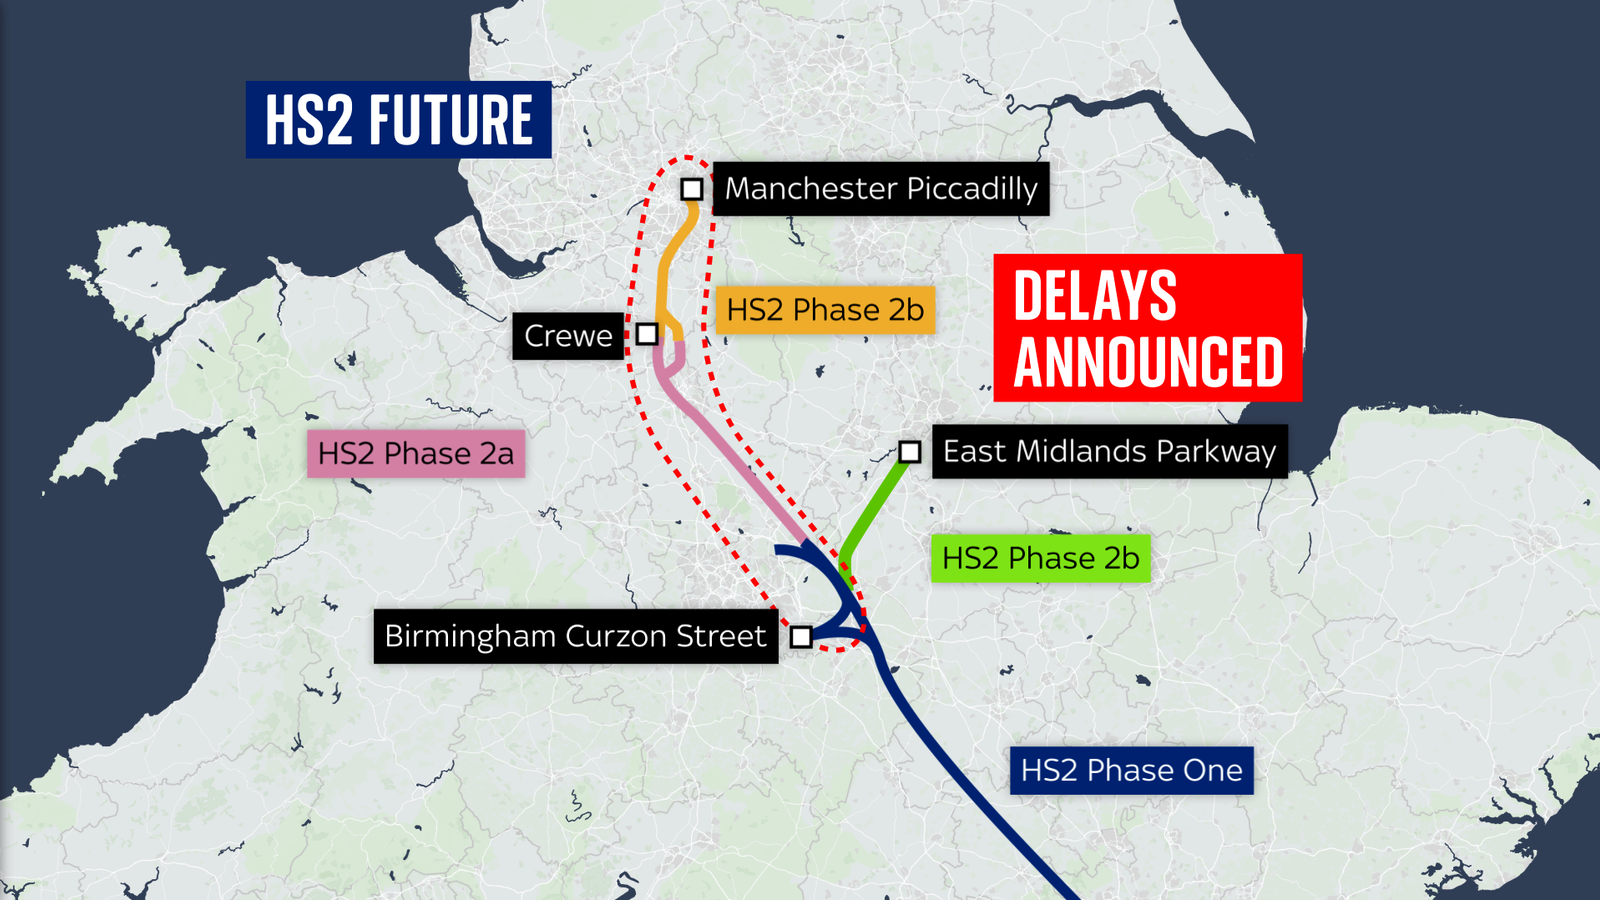 HS2: The morphing conundrum - Why are so many people upset with rail project?